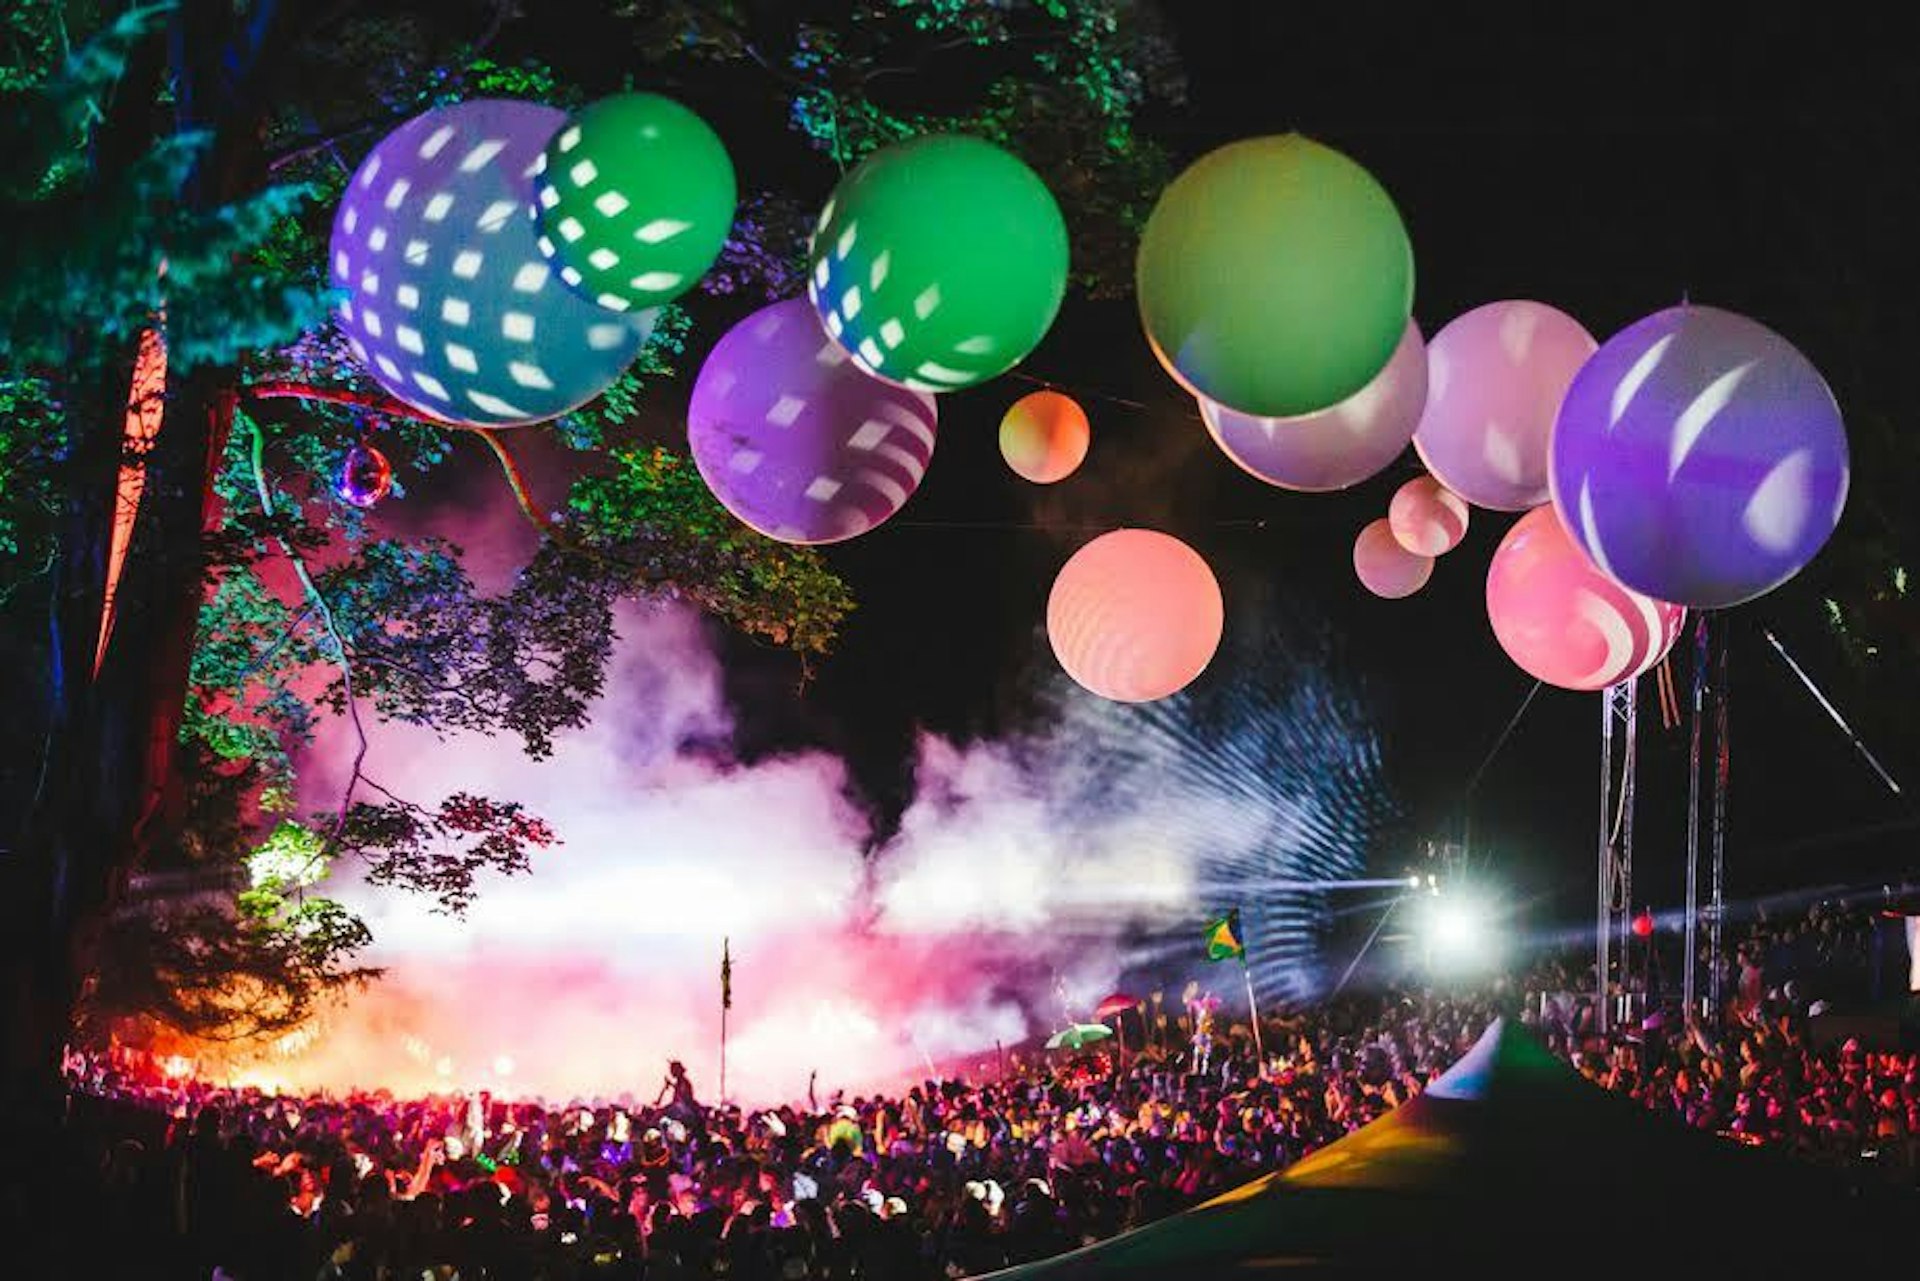 The must-see sounds, sights and eats at Wilderness Festival